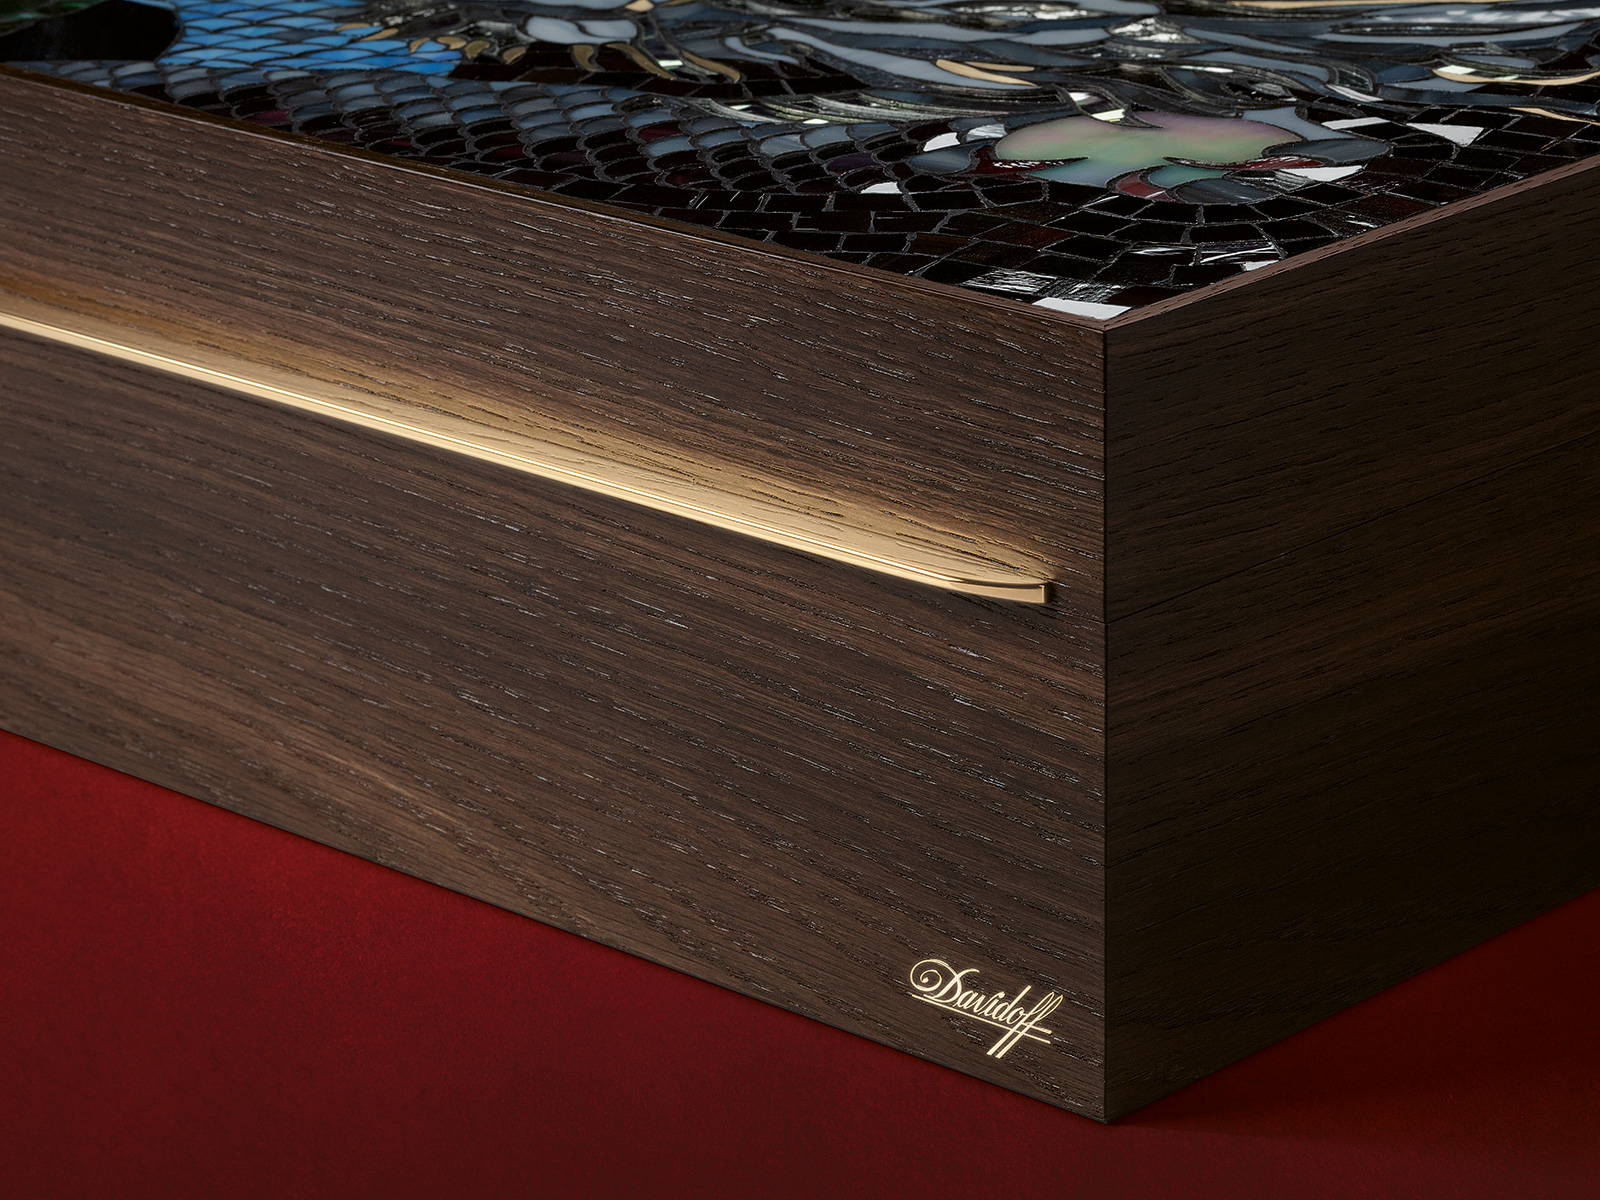 The Davidoff Year of the Dragon Masterpiece Humidor photographed from the front with the Davidoff logo visible. 